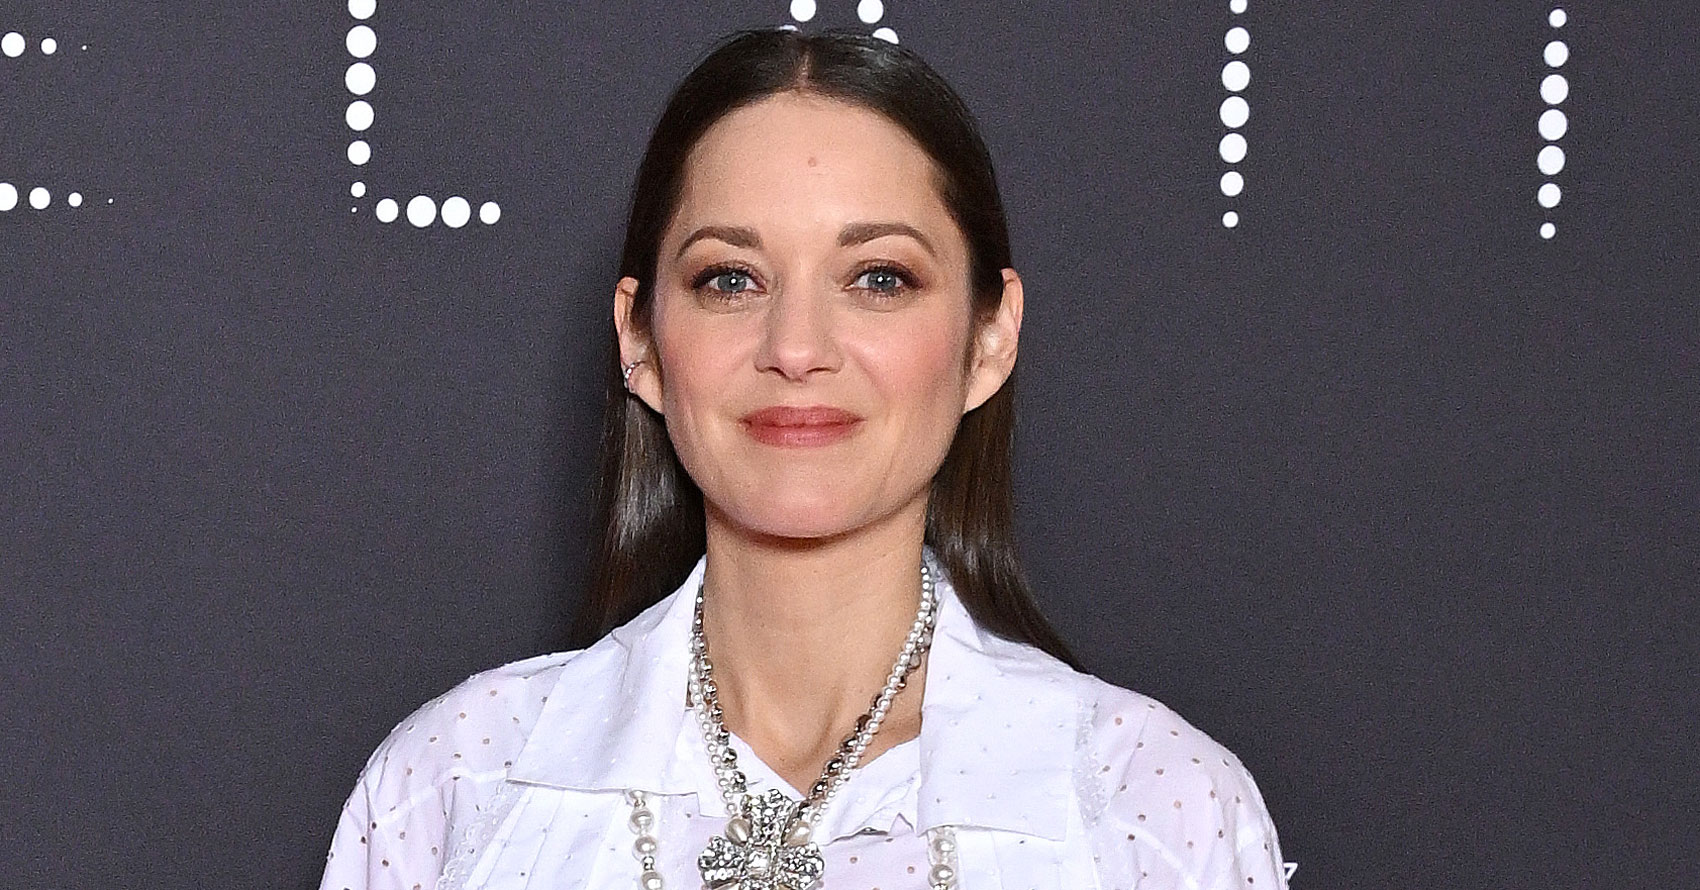 Yep, Marion Cotillard Just Layered Baggy Shorts Over Pants on the Red Carpet